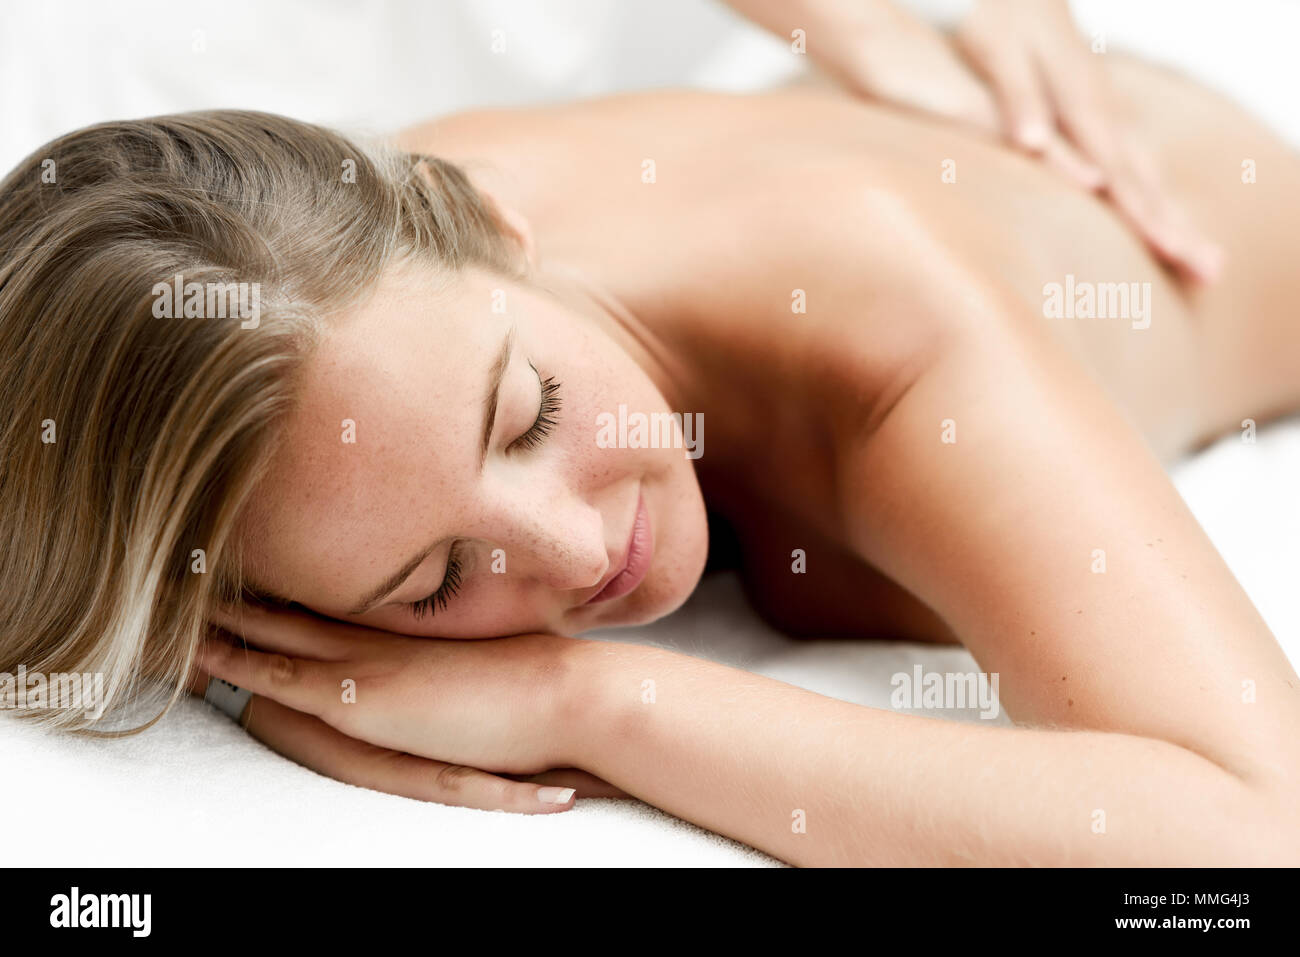 Young blond woman having massage in the spa salon. Massage and body care. Body massage treatment. Stock Photo